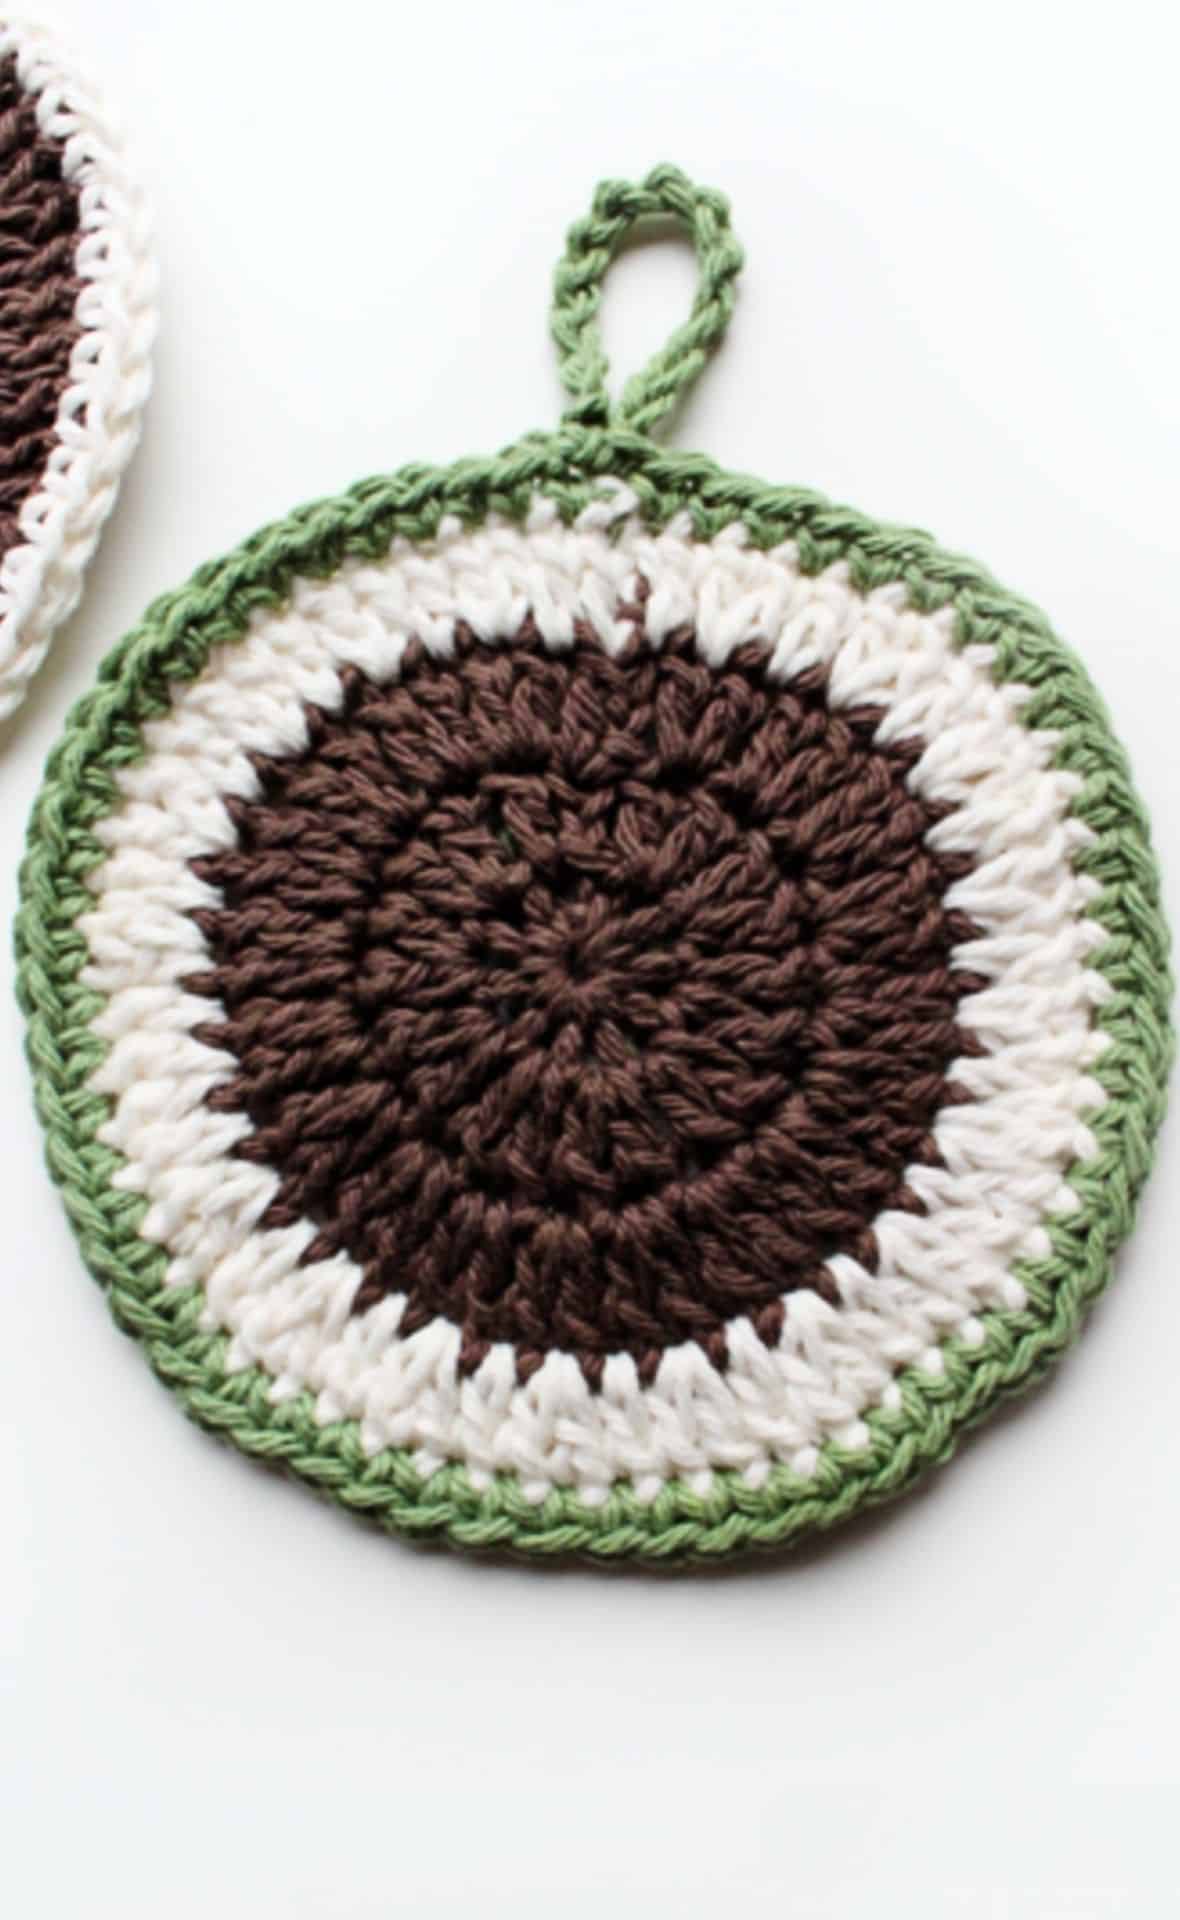 8 Square Cotton Crocheted Pot Holder Charcoal